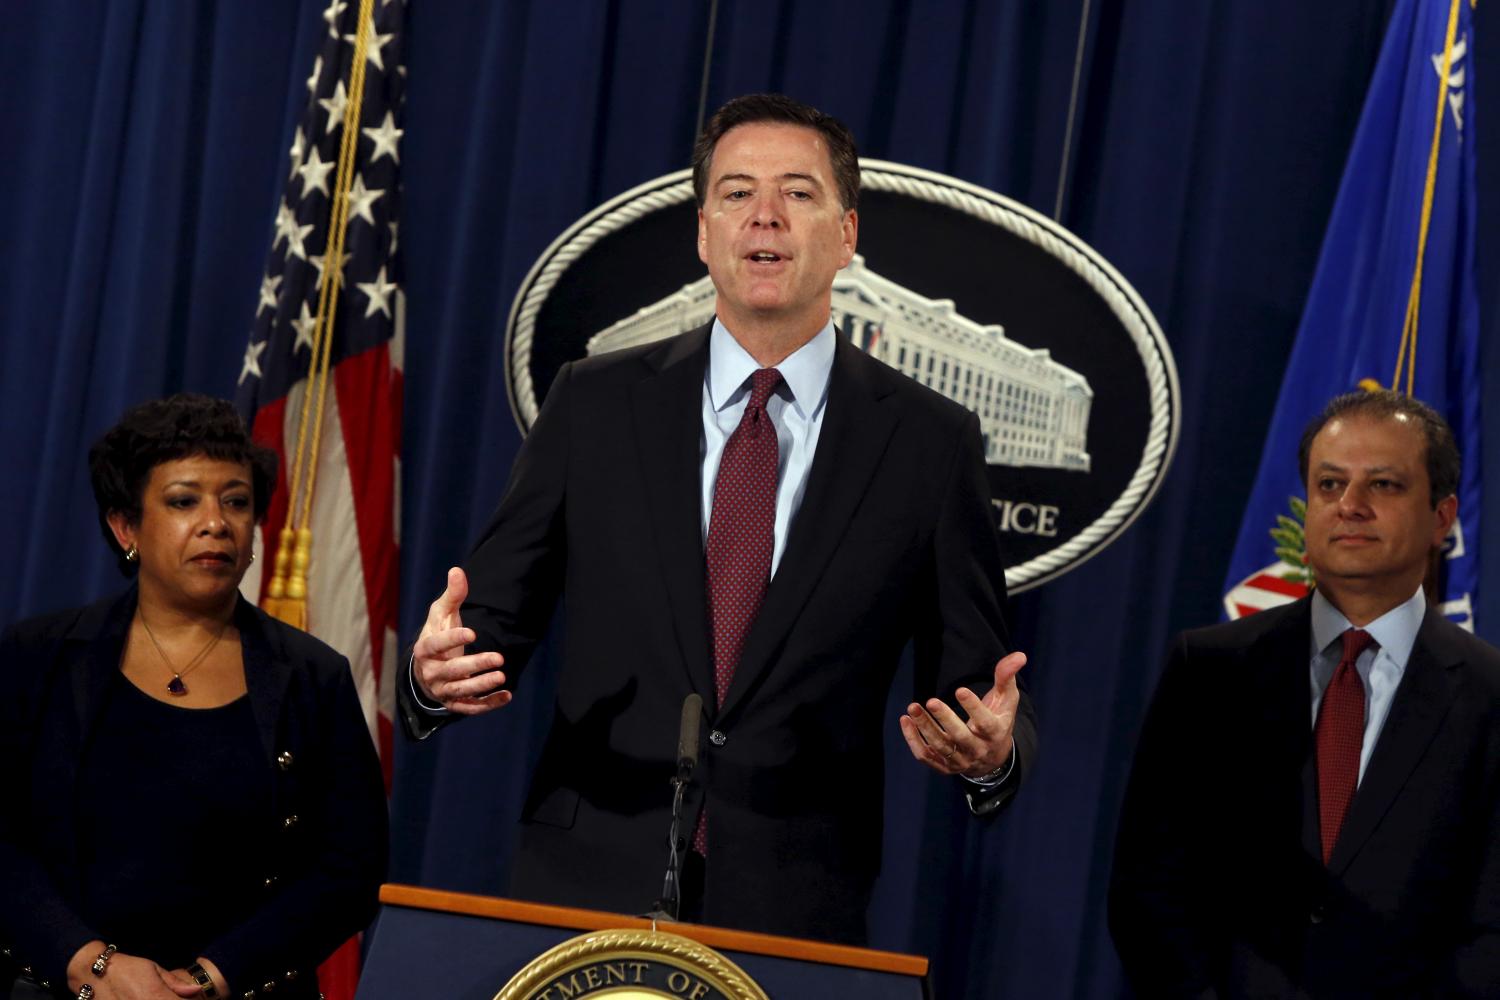 U.S. Attorney General Loretta Lynch (L-R), Federal Bureau of Investigation Director James Comey and Manhattan U.S. Attorney Preet Bharara hold a news conference to announce indictments on Iranian hackers for a coordinated campaign of cyber attacks in 2012 and 2013 on several U.S. banks and a New York dam, at the Justice Department in